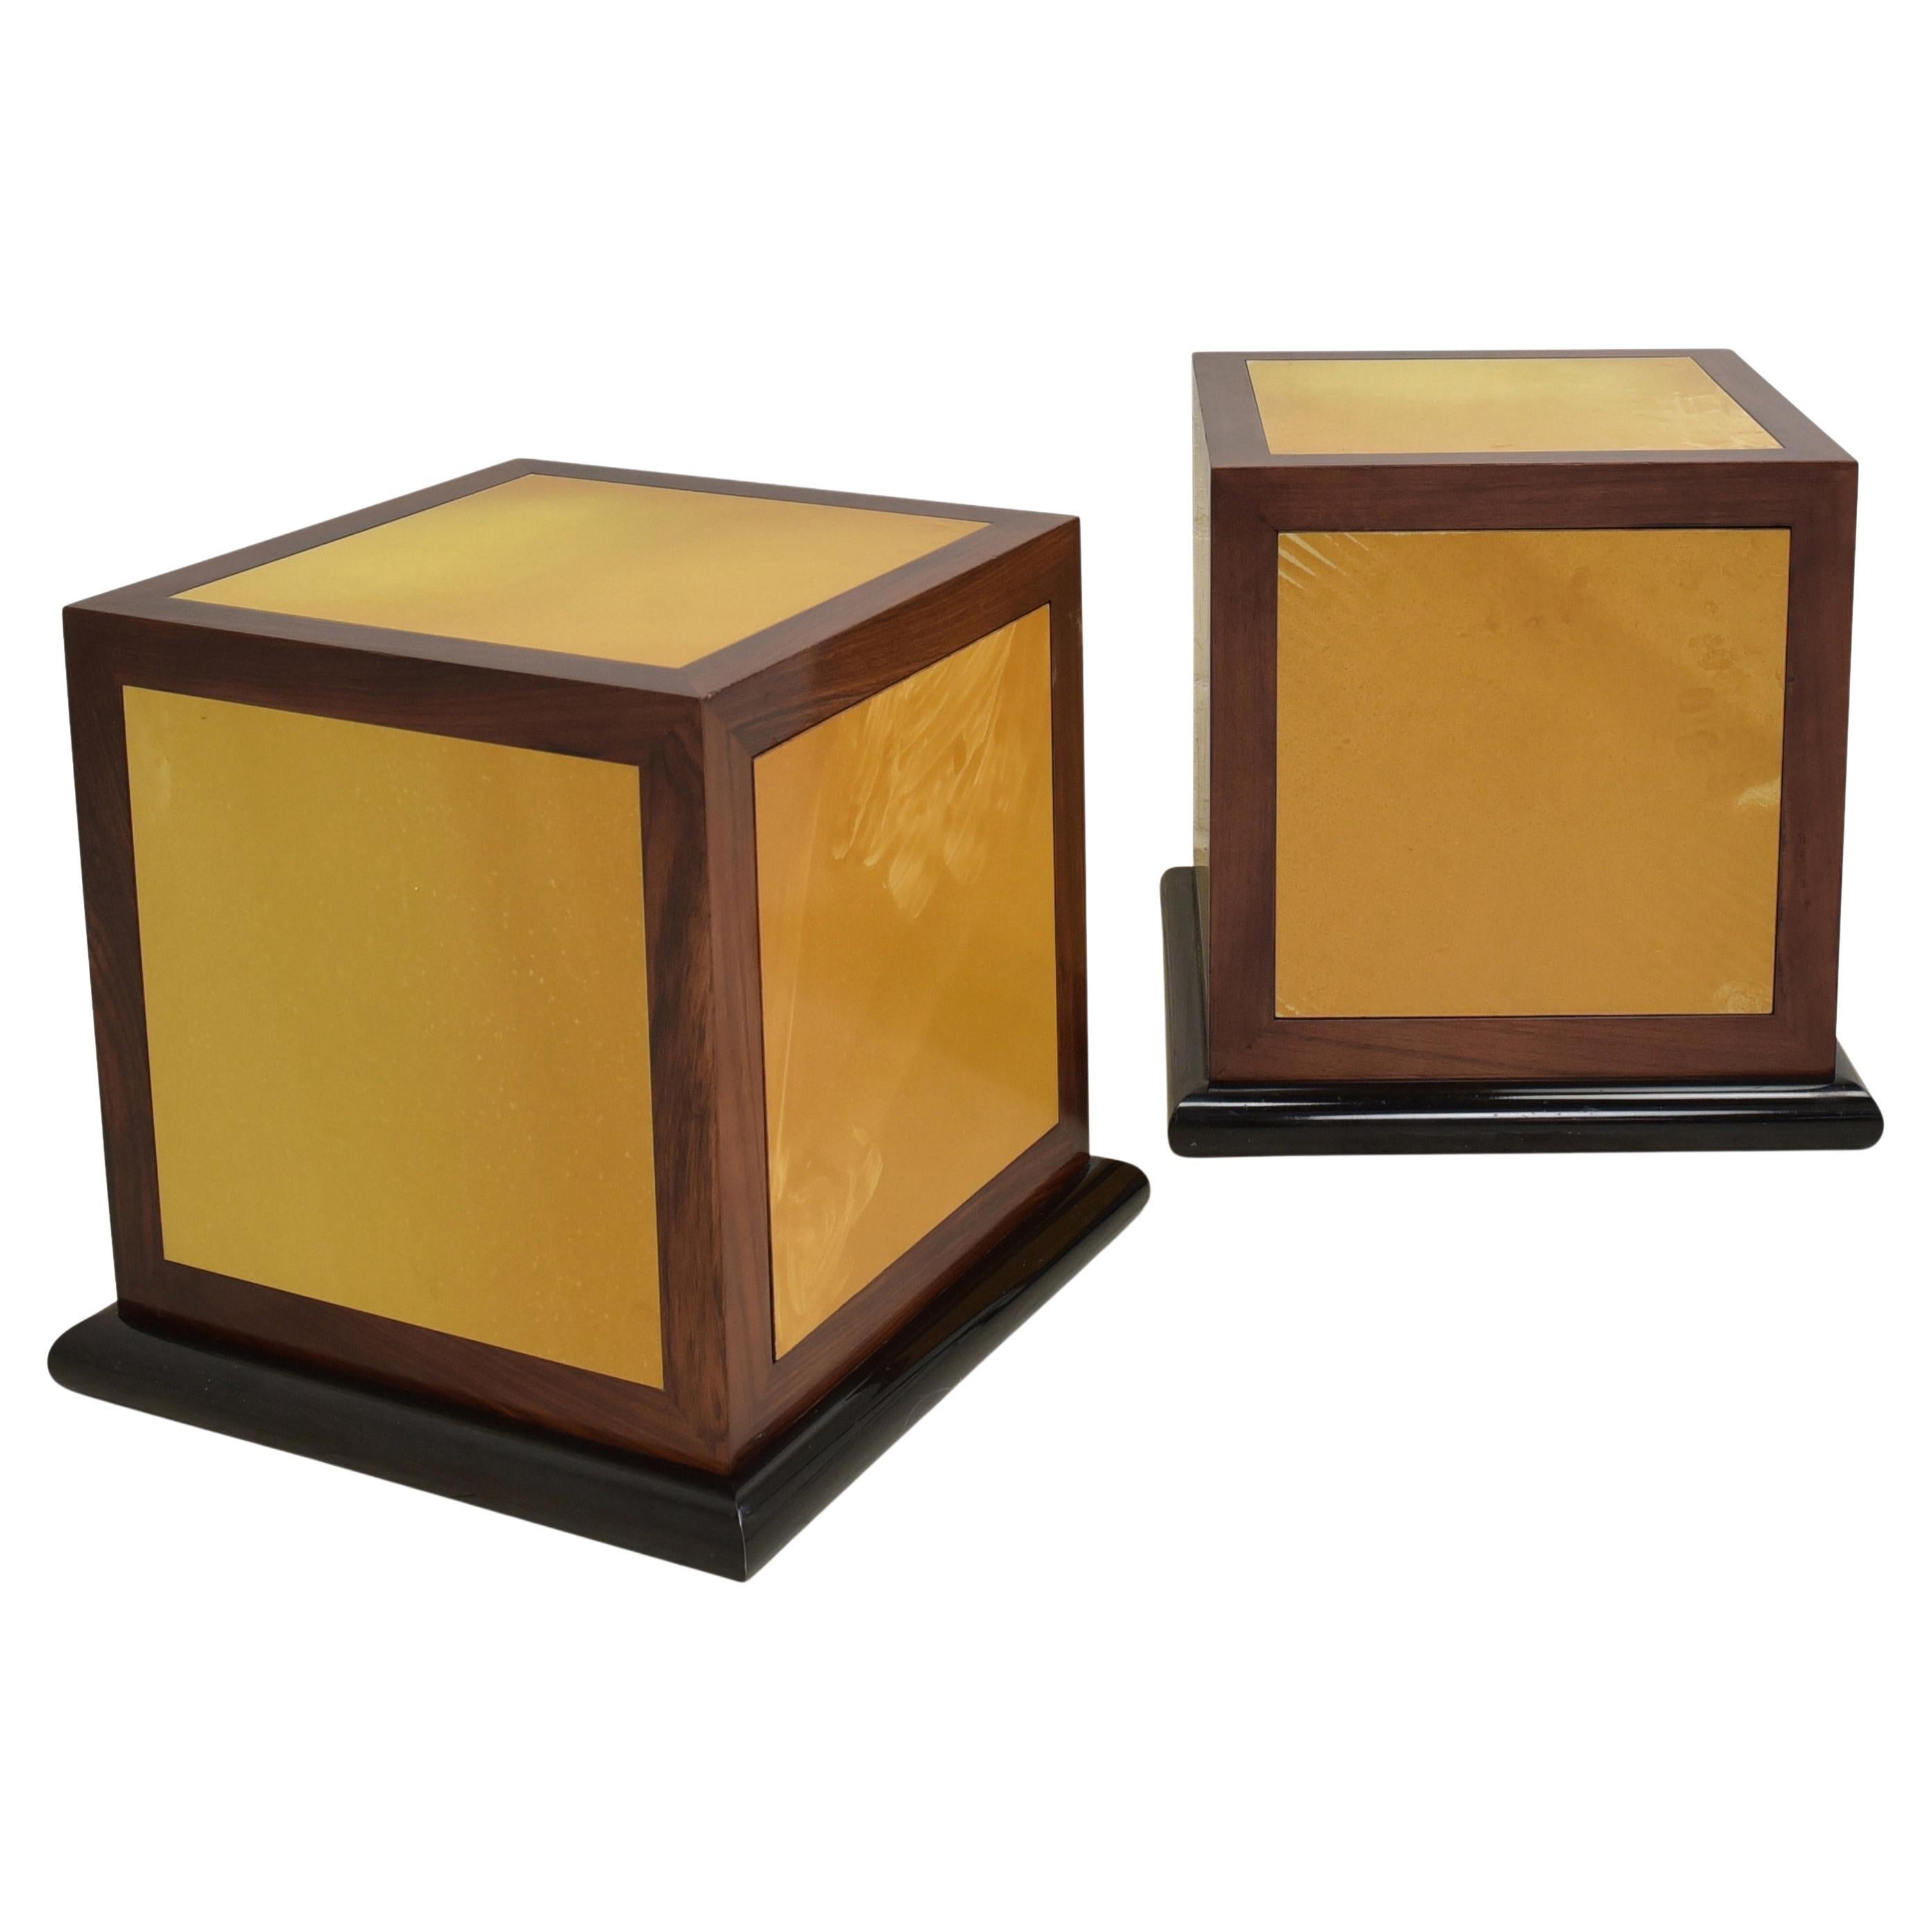 Pair of Vintage Bedside Tables Cube Design, Retro 80s, 90s